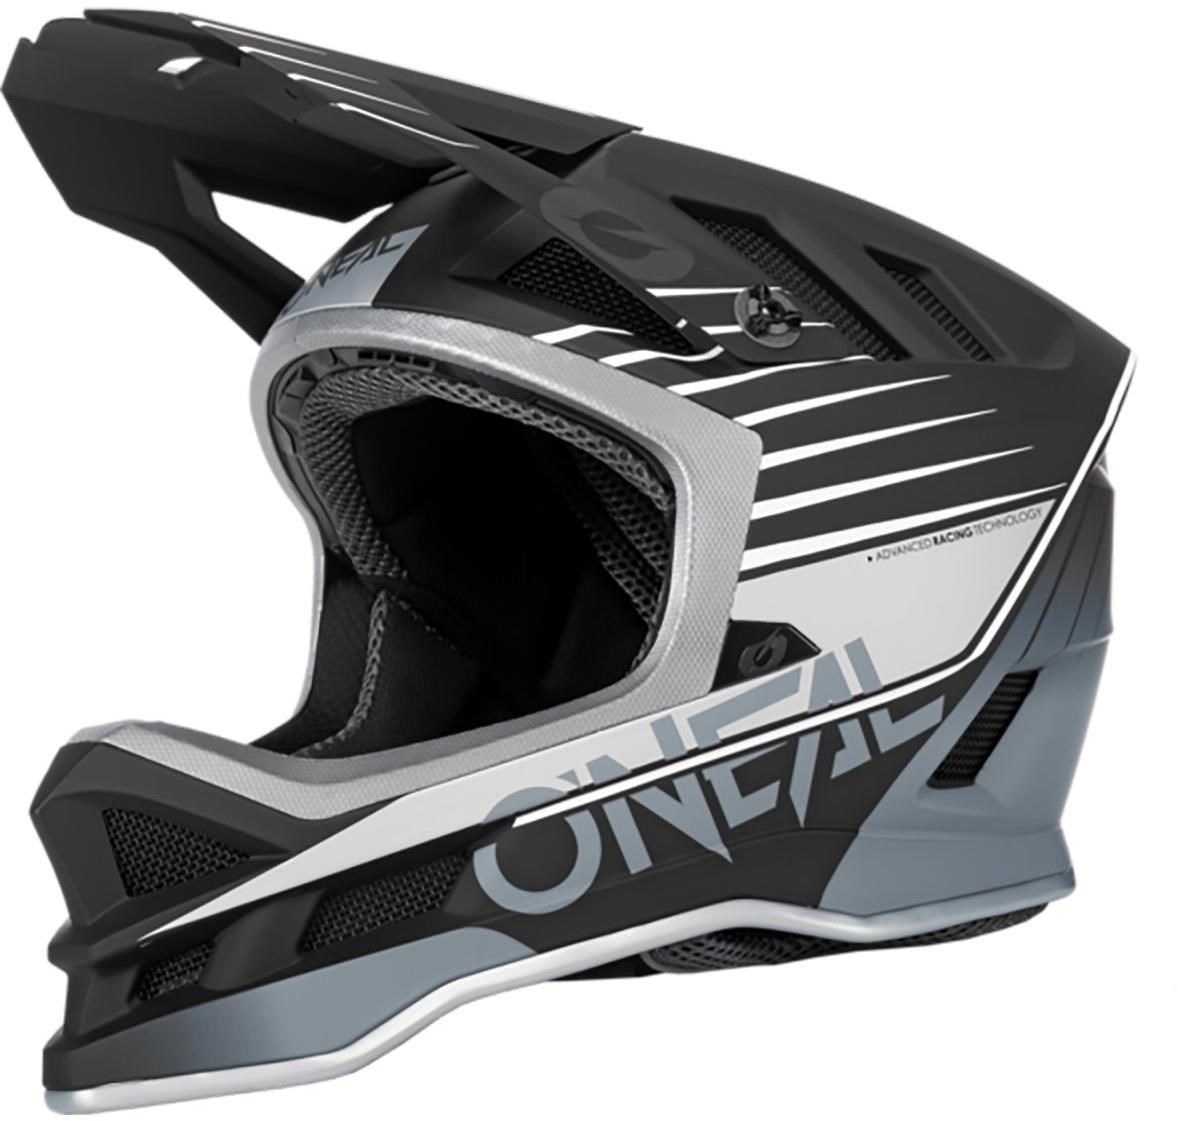 ONeal Blade Delta Full Face MTB Cycling Helmet product image